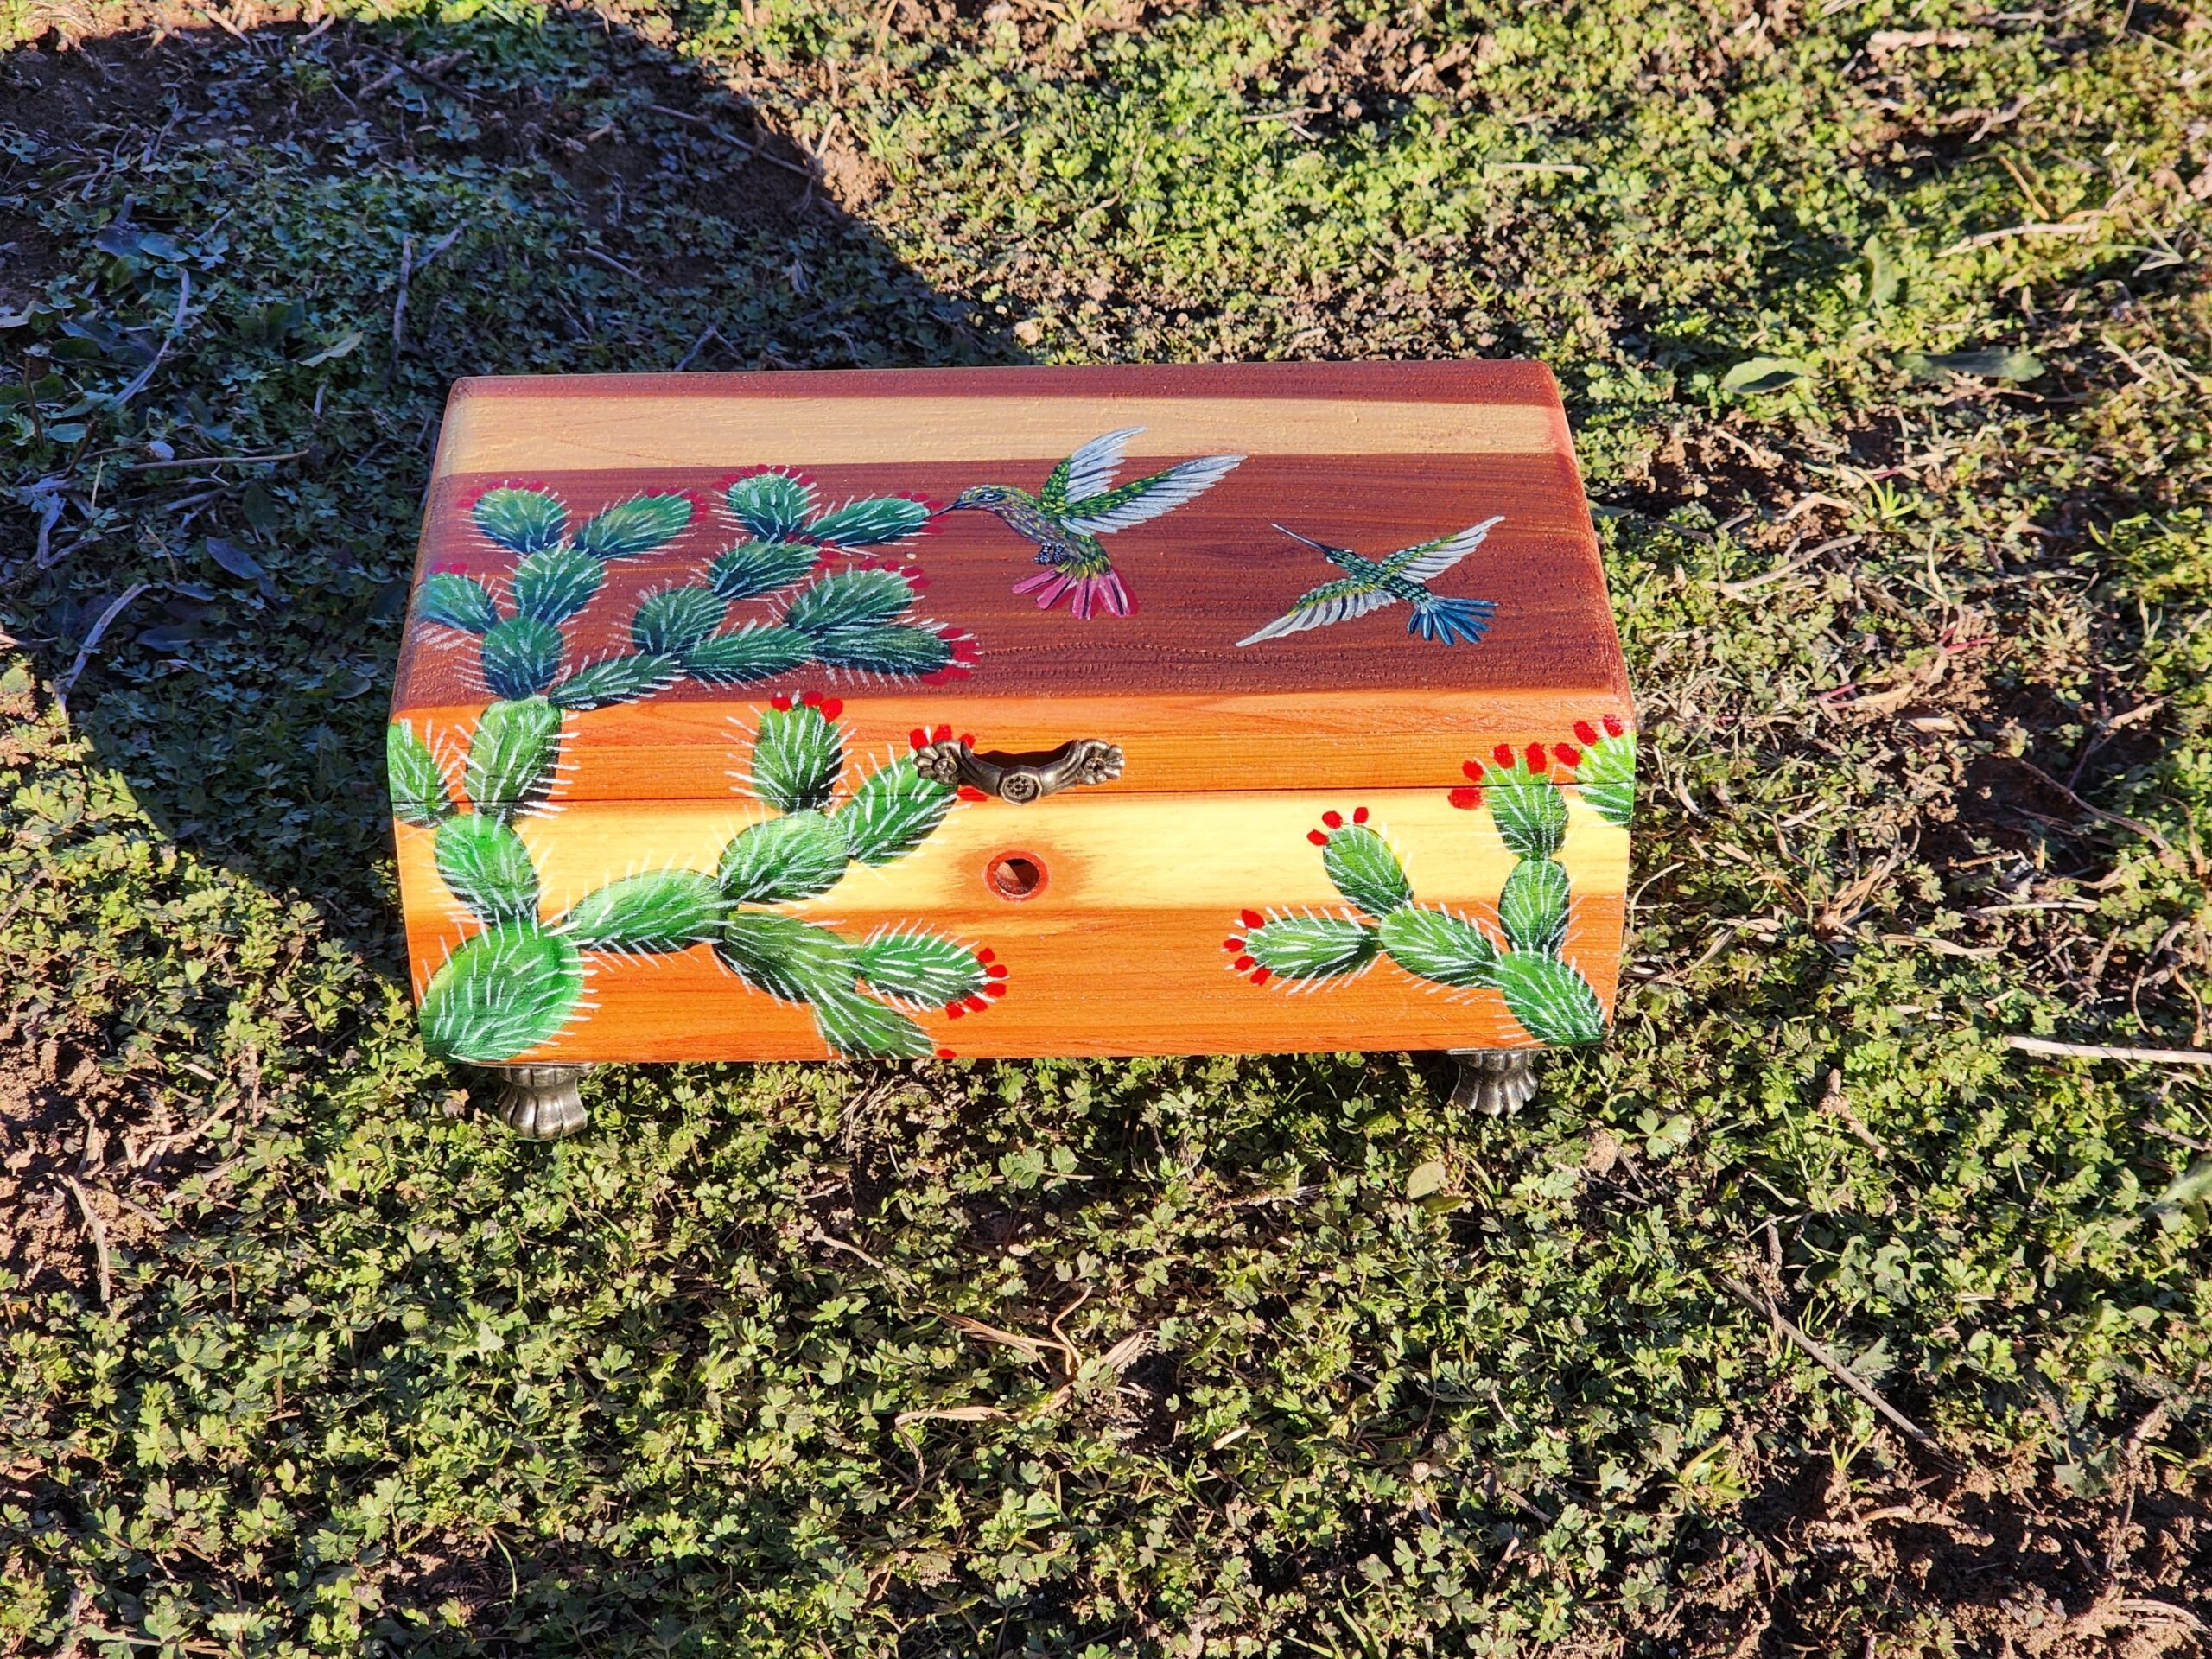 Repurposed antique wooden jewelry box with original design of hummingbirds flying over some cacti. This box used to be a cigar box made of cedar wood. Metal feet and foam ring pad inside.